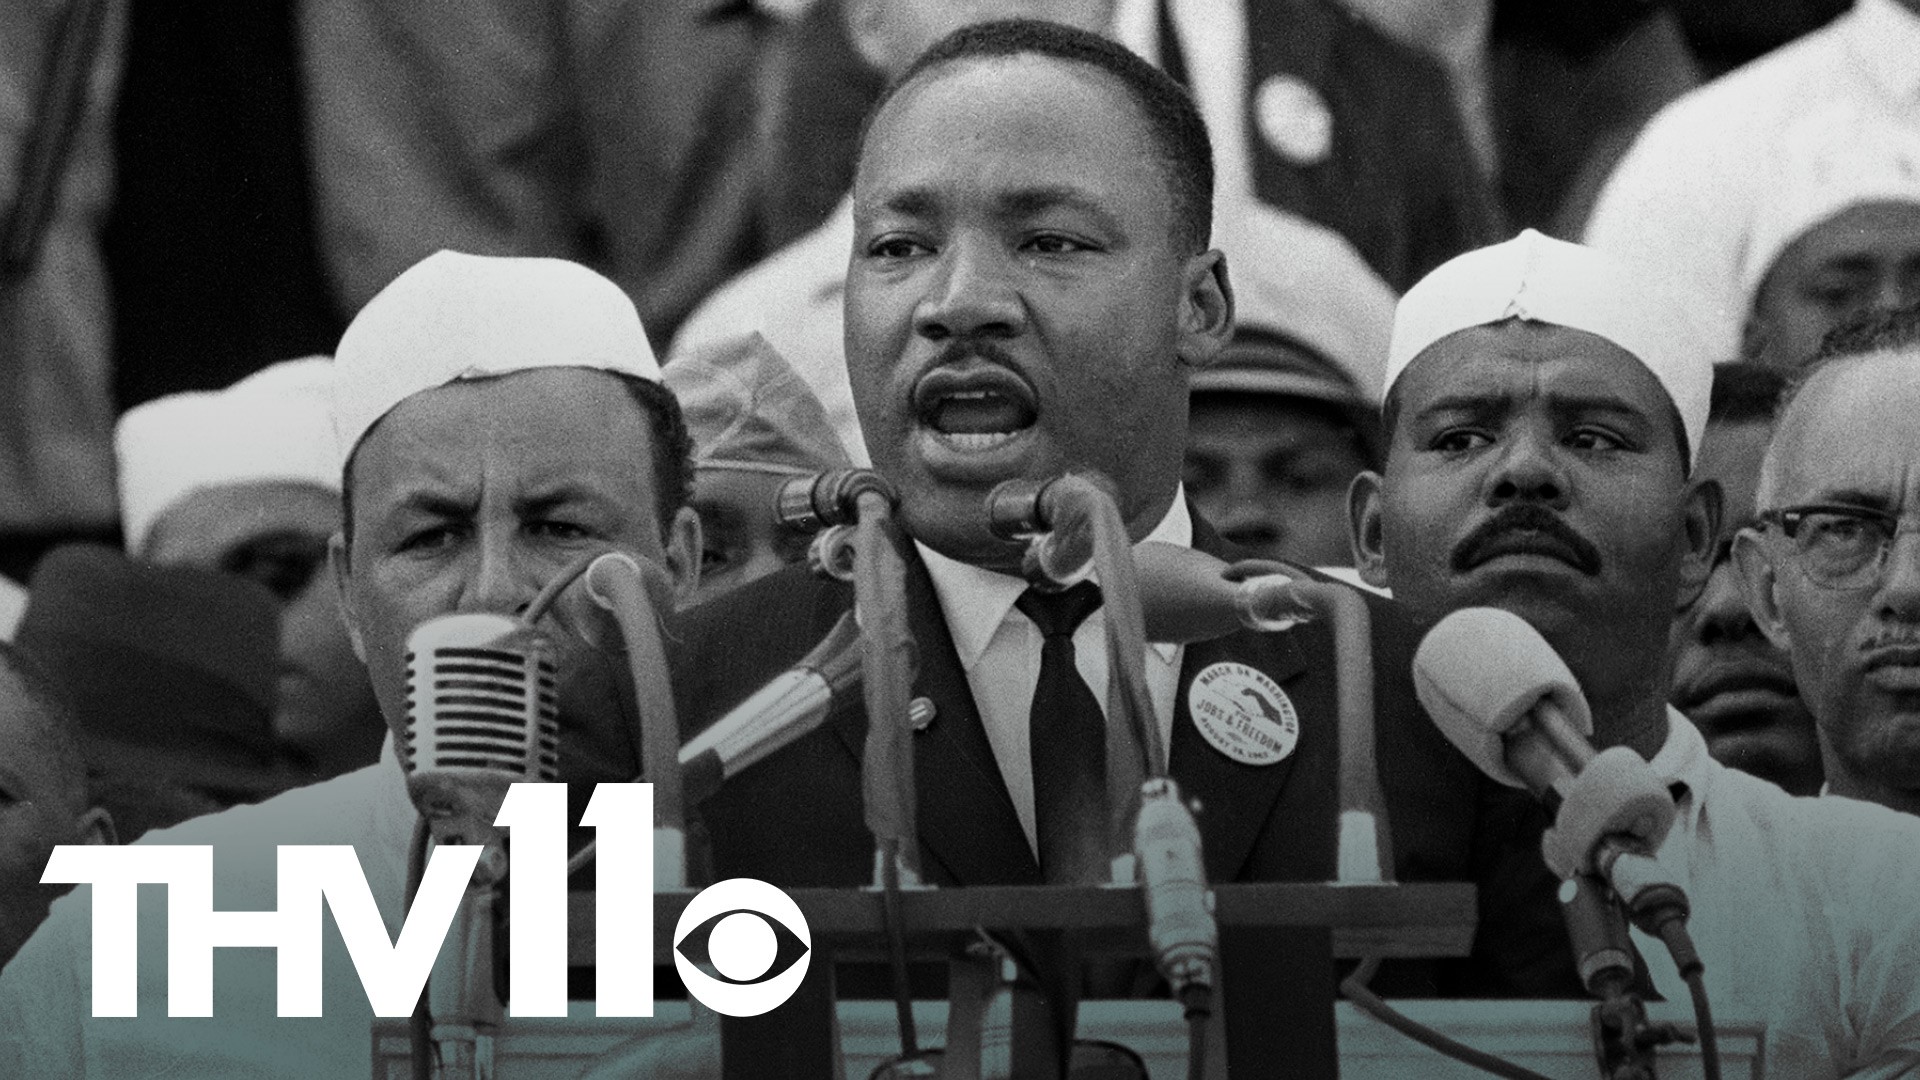 Most now know Dr. Martin Luther King Jr as a civil rights icon, but he was at first a controversial figure during the the civil right movement.